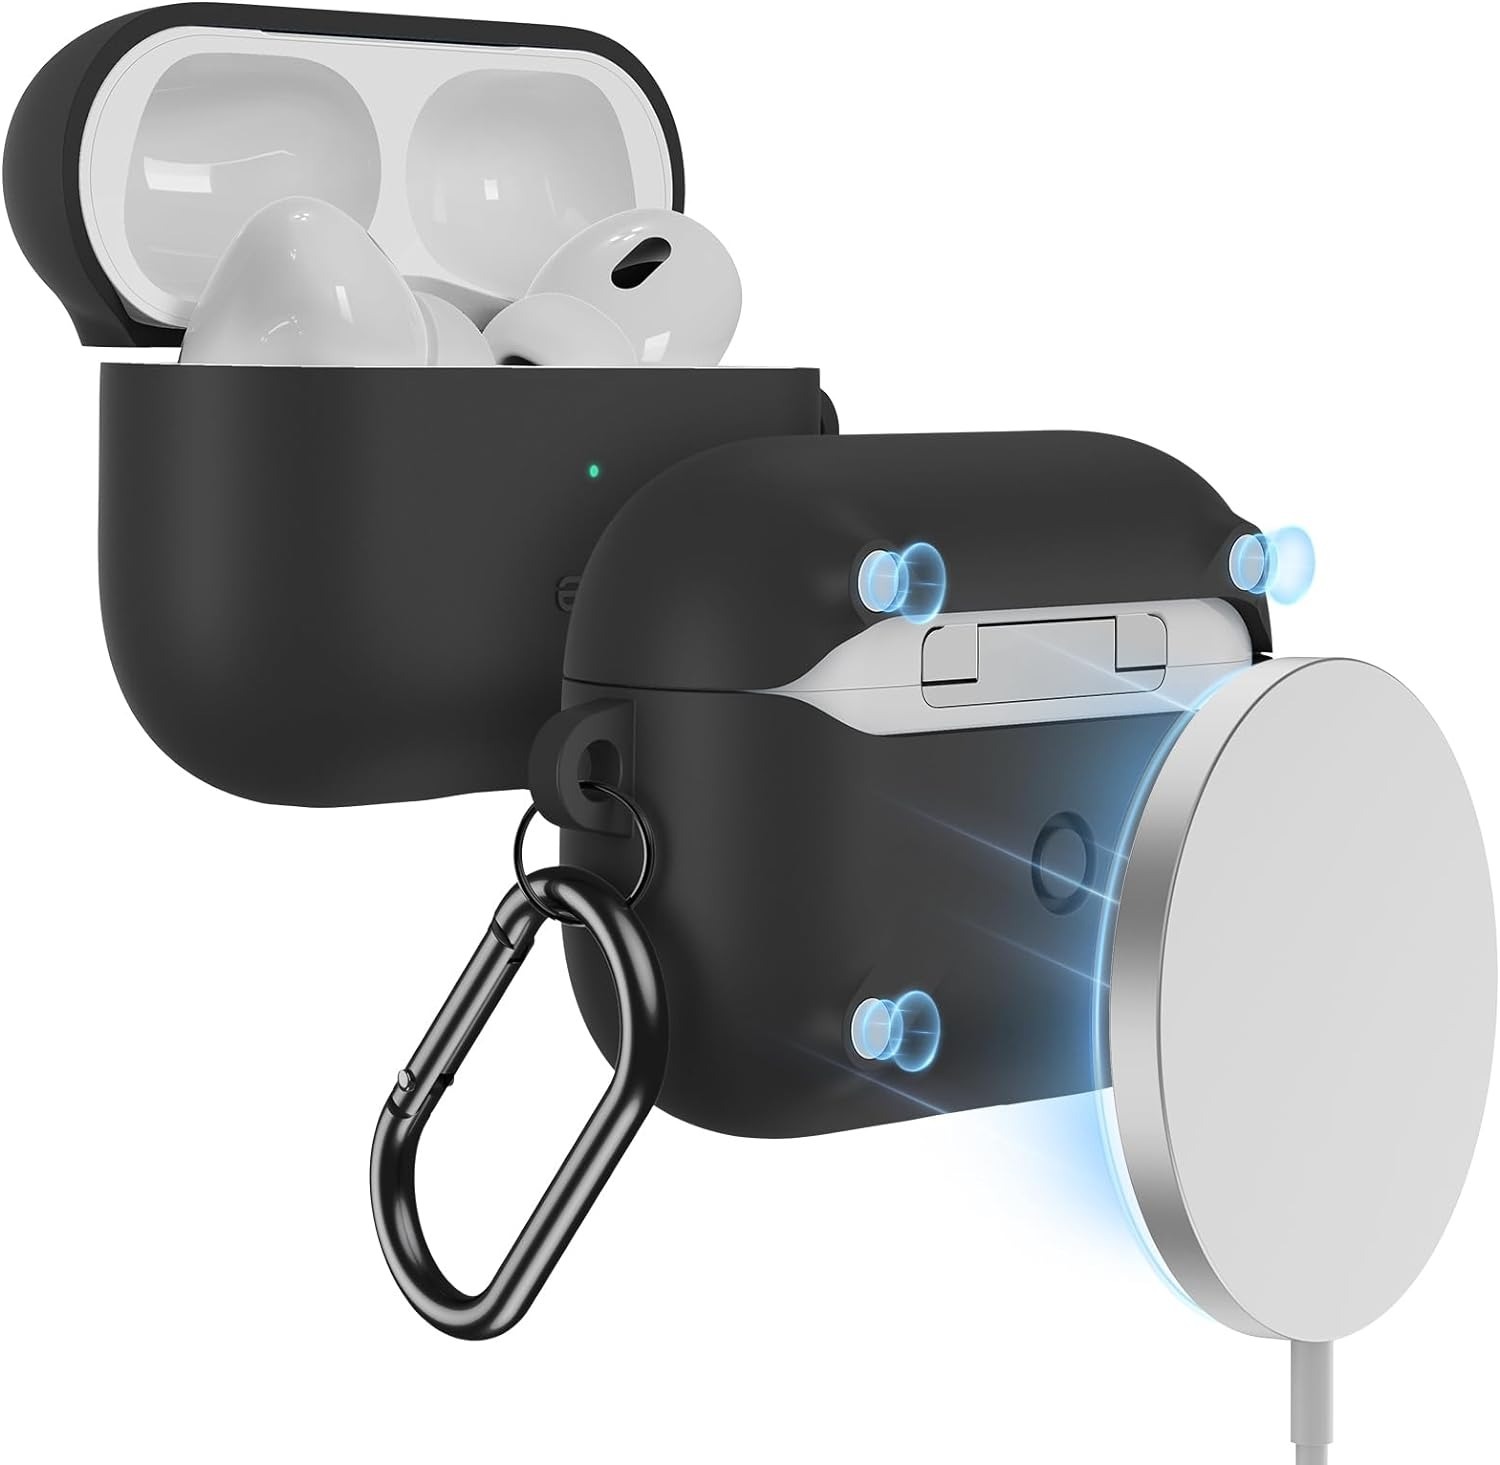 ESR AirPods Pro Case for 1st and 2nd Gen (Black) $3.99 + Free Shipping w/Prime or $35+